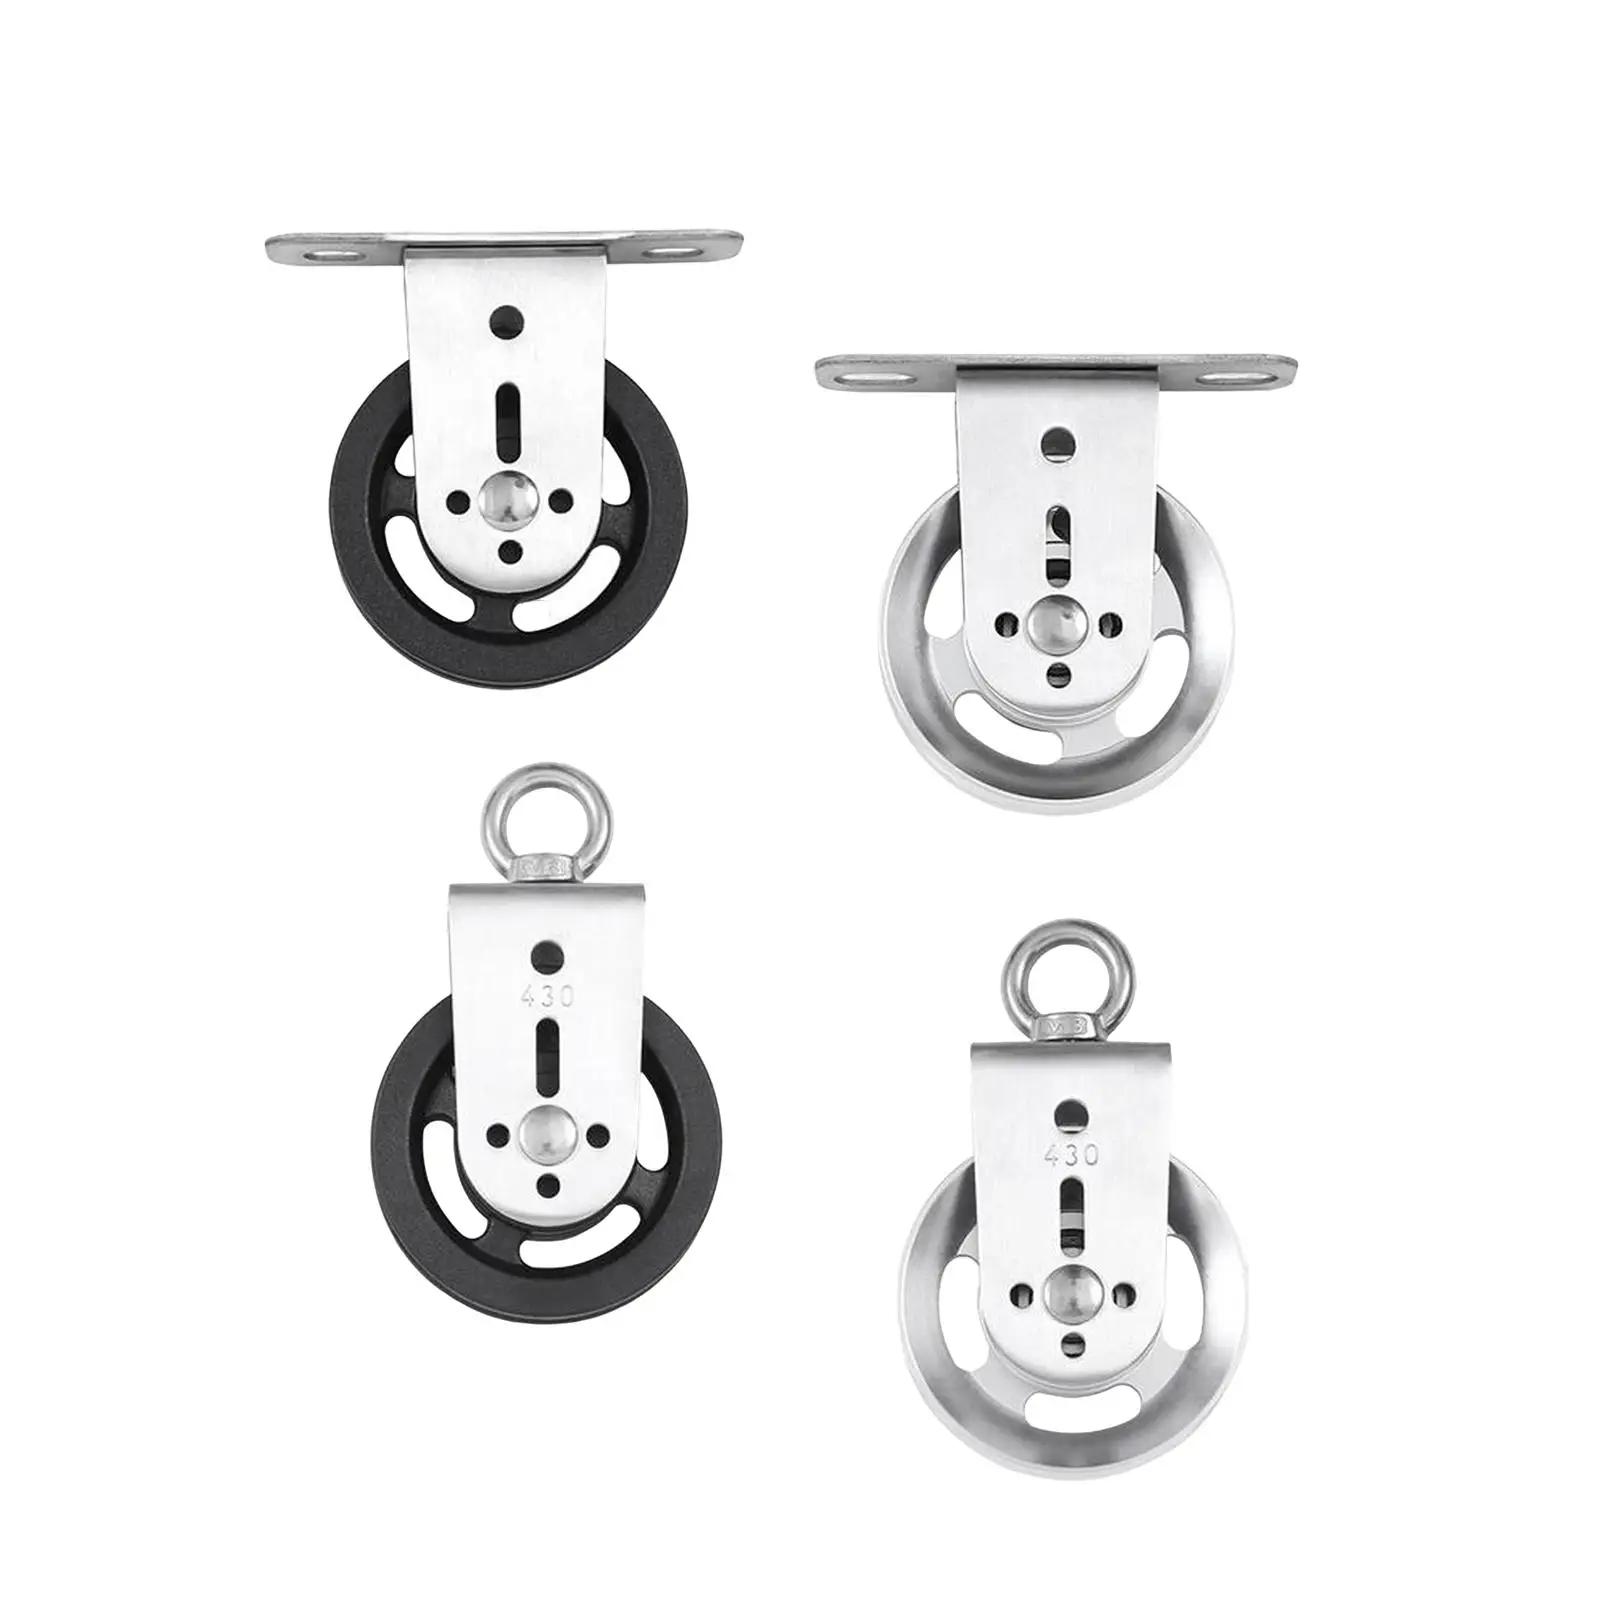 Pulley Wheel Lightweight Sturdy Mute Pulley Systems Lifting for Home Gym Fitness